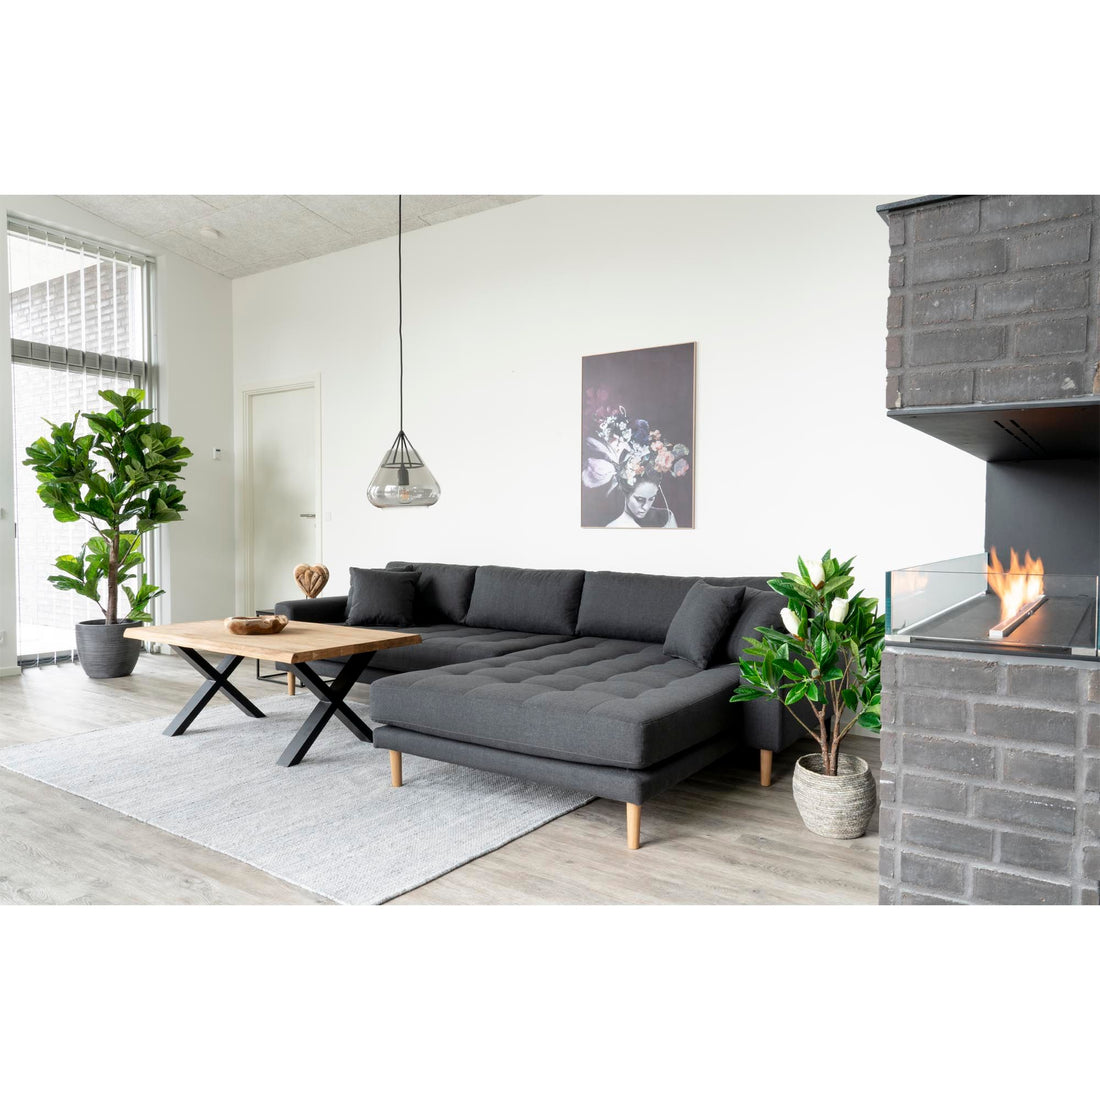 Lido Lounge Sofa - Lounge Sofa, right -wing in dark gray with four pillows and nature wooden legs, HN1002 - 1 - pcs